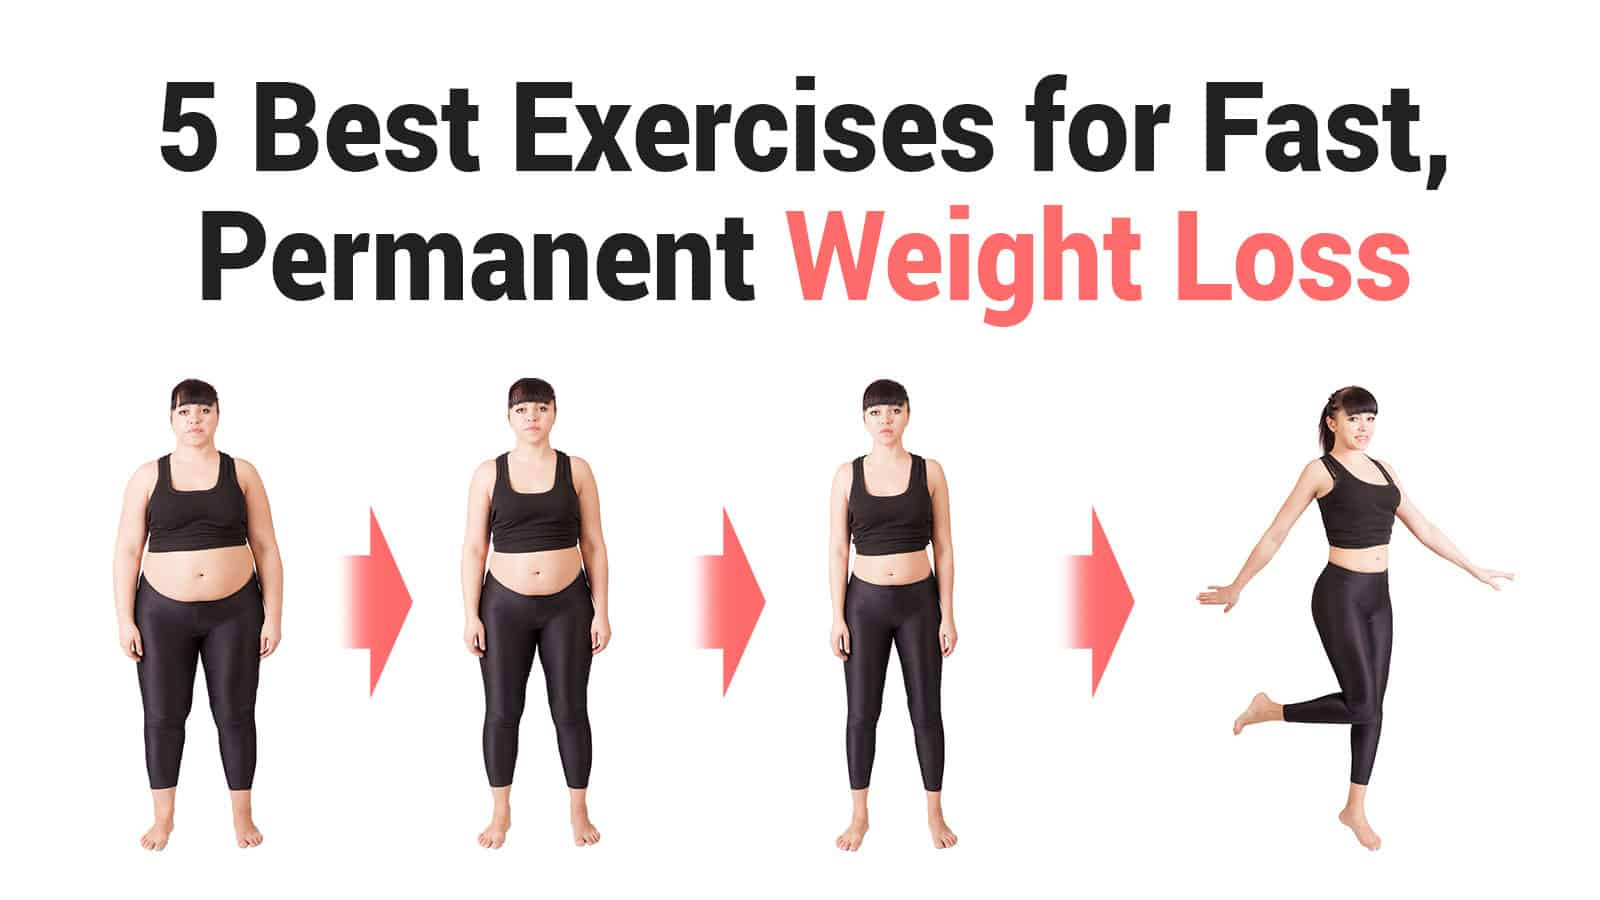 Weight Loss Exercises Fast
 5 Best Exercises for Fast Permanent Weight Loss